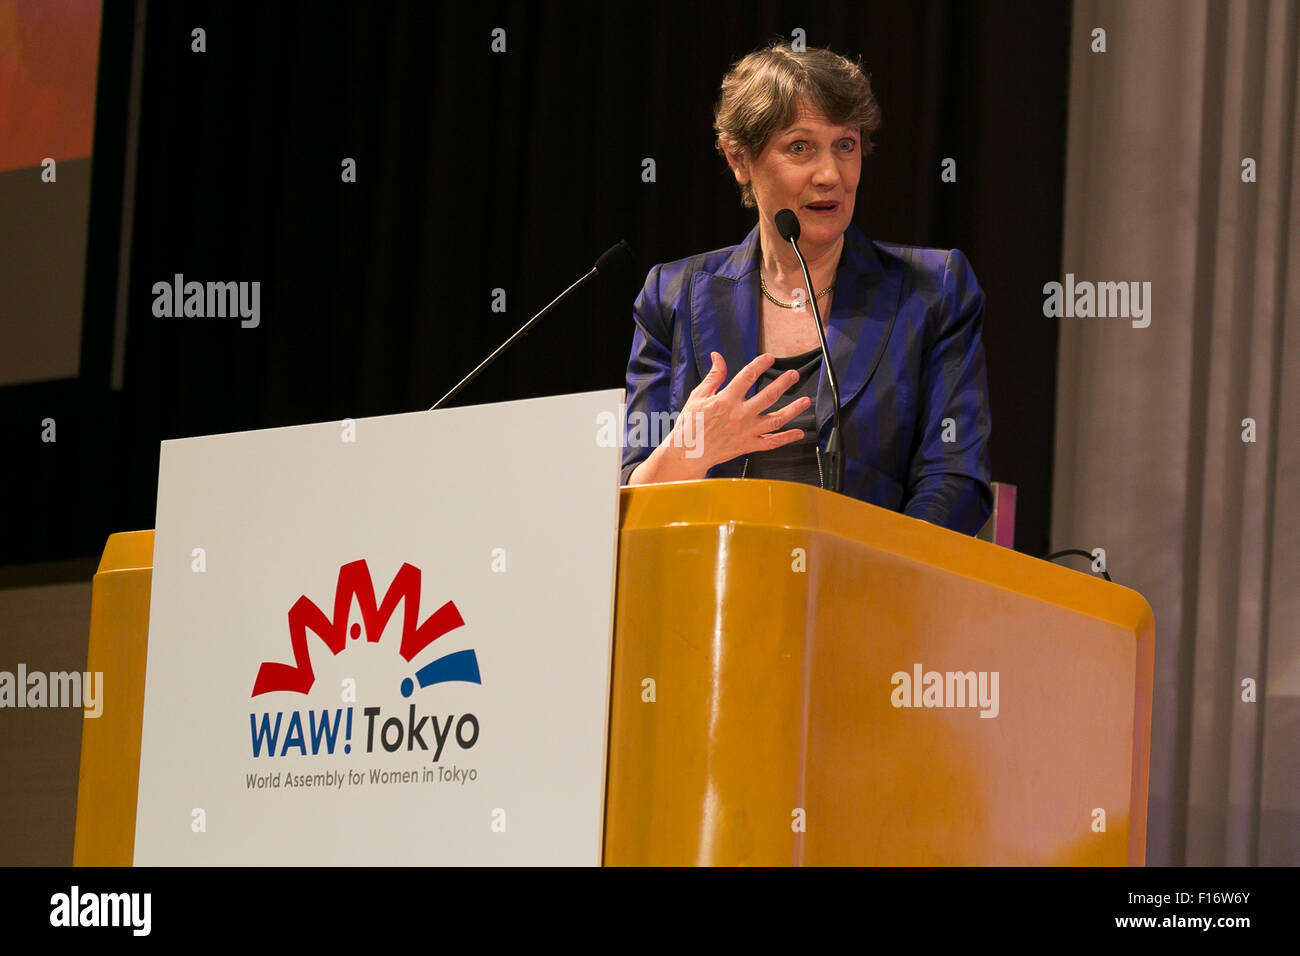 Helen Clark Administrator of United Nations Development Programme (UNDP) speaks during The World Assembly for Women in Tokyo: WAW! 2015 on August 28, 2015, Tokyo, Japan. About 140 female leader (from 40 countries and 7 international organizations) attended the ''WAW! 2015'' to discuss the roles of women in politics, business and society. Prime Minister Abe has set a goal of increasing the representation of women in management roles to 30 percent by 2020. © Rodrigo Reyes Marin/AFLO/Alamy Live News Stock Photo